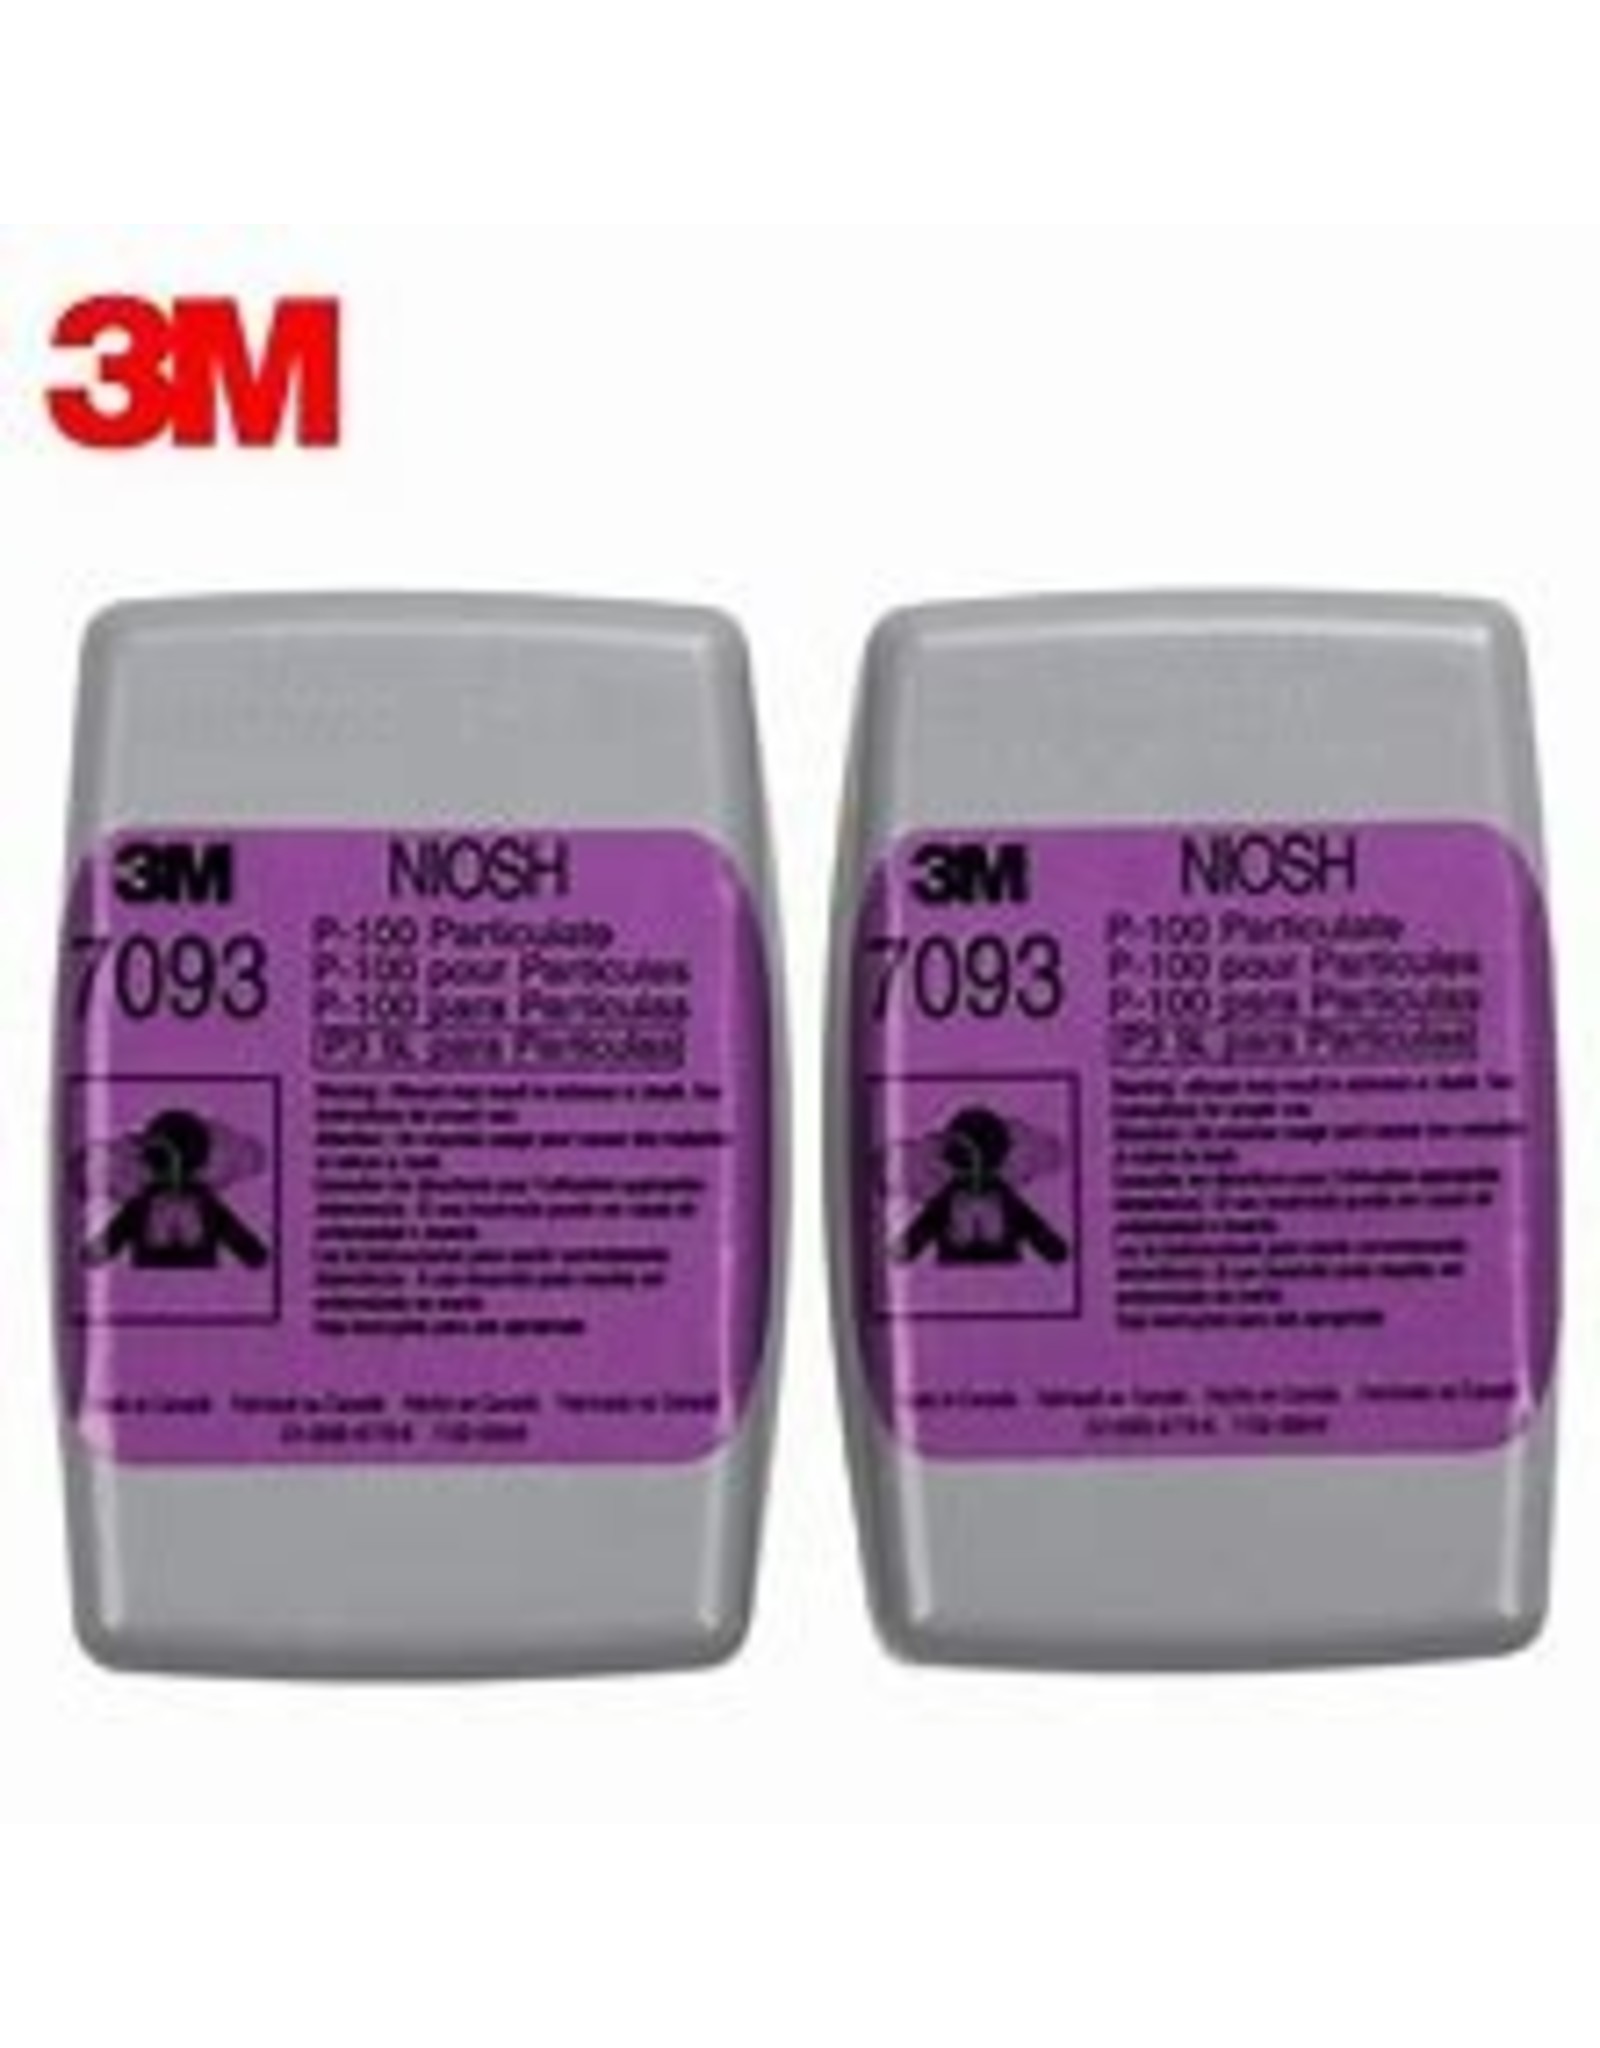 3M P100 filter with hard Cover